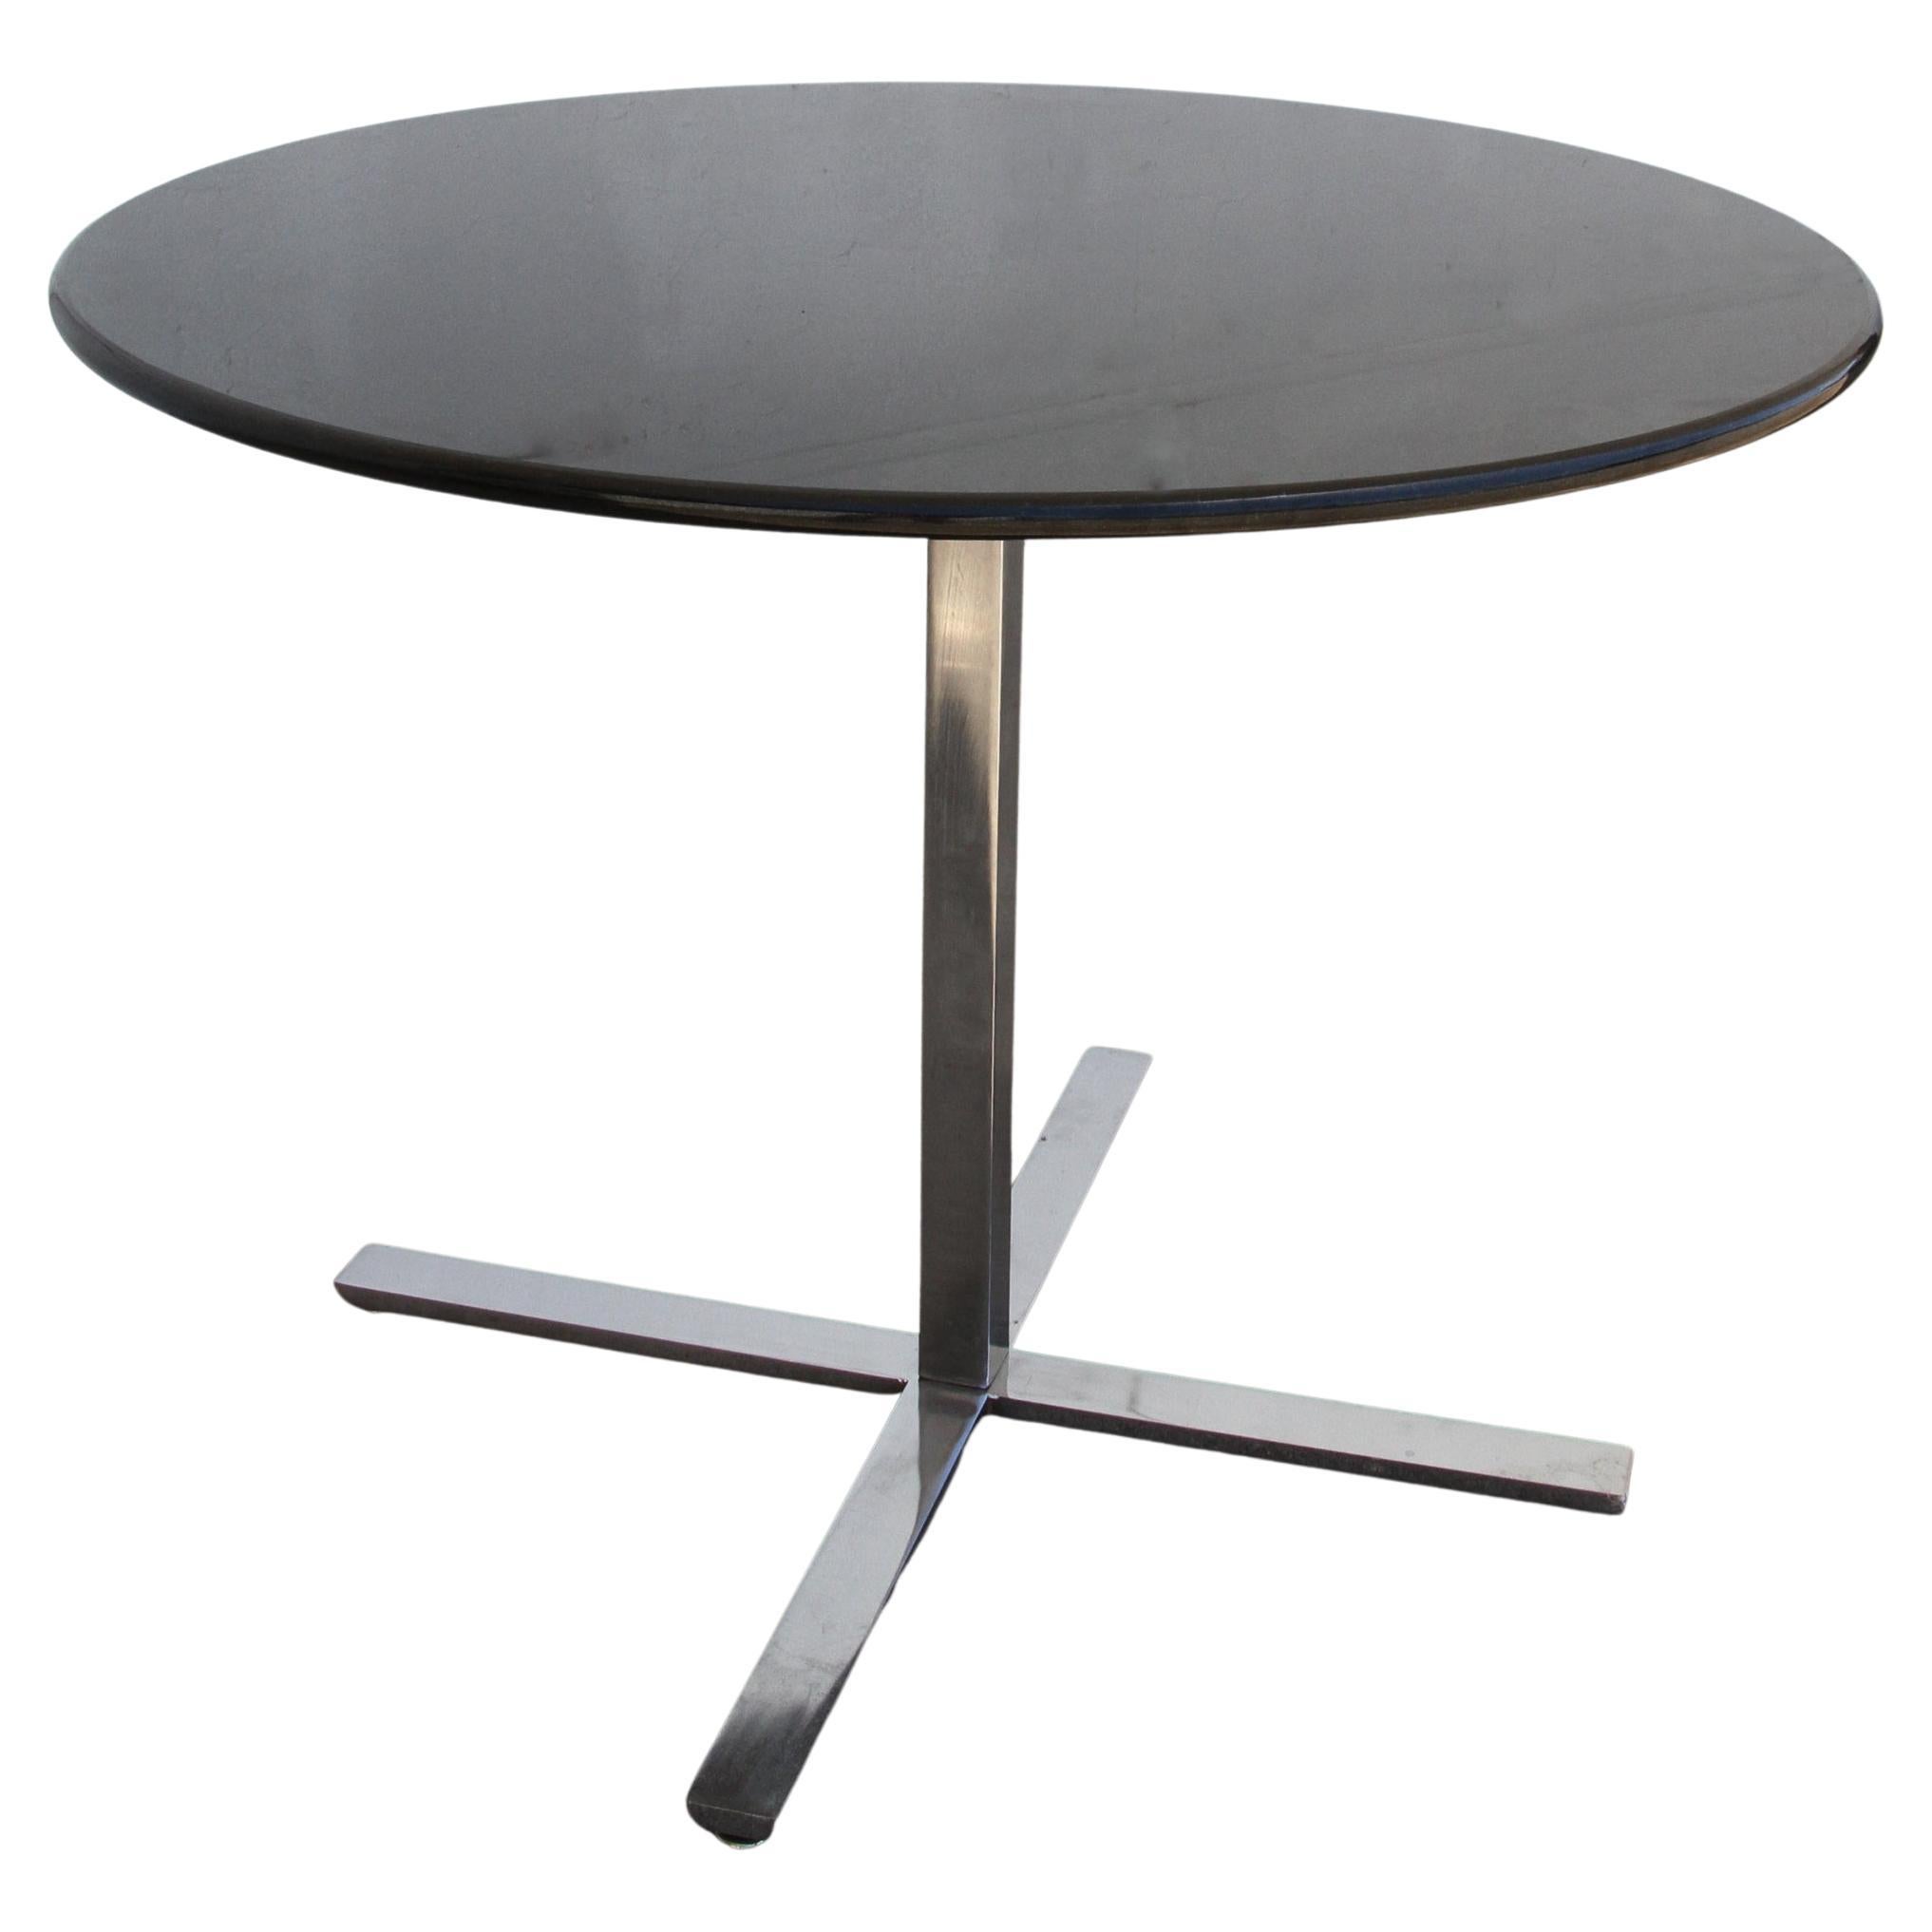 Steelcase 38” Diameter Round Granite Table with Stainless Base  For Sale